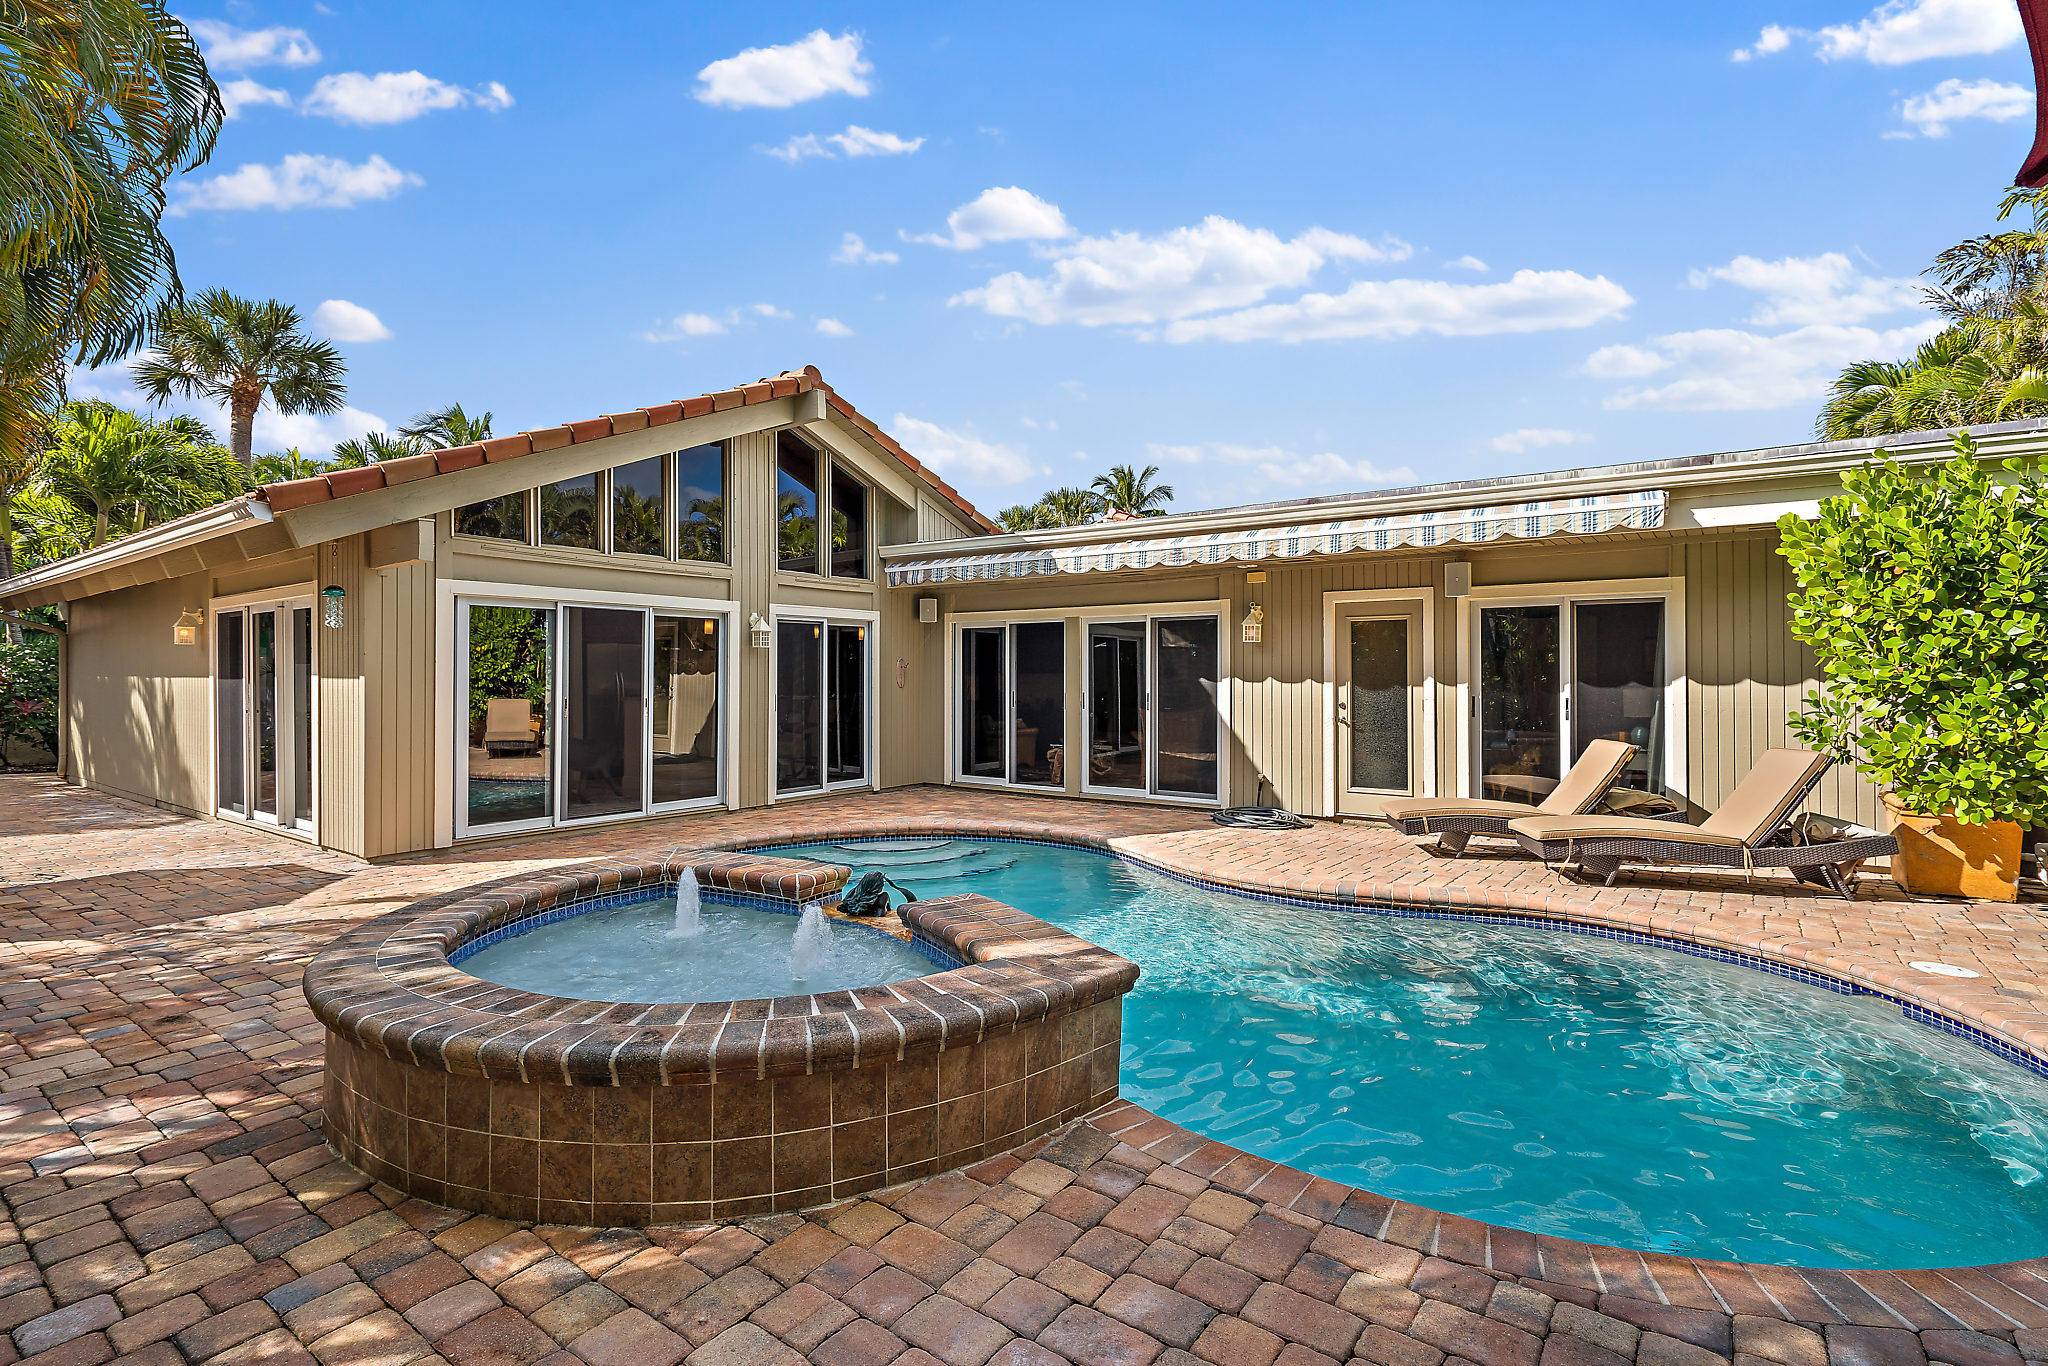 Enjoy a Summer retreat to your beach house sanctuary in gated Ocean Walk with a private oasis yard pool.